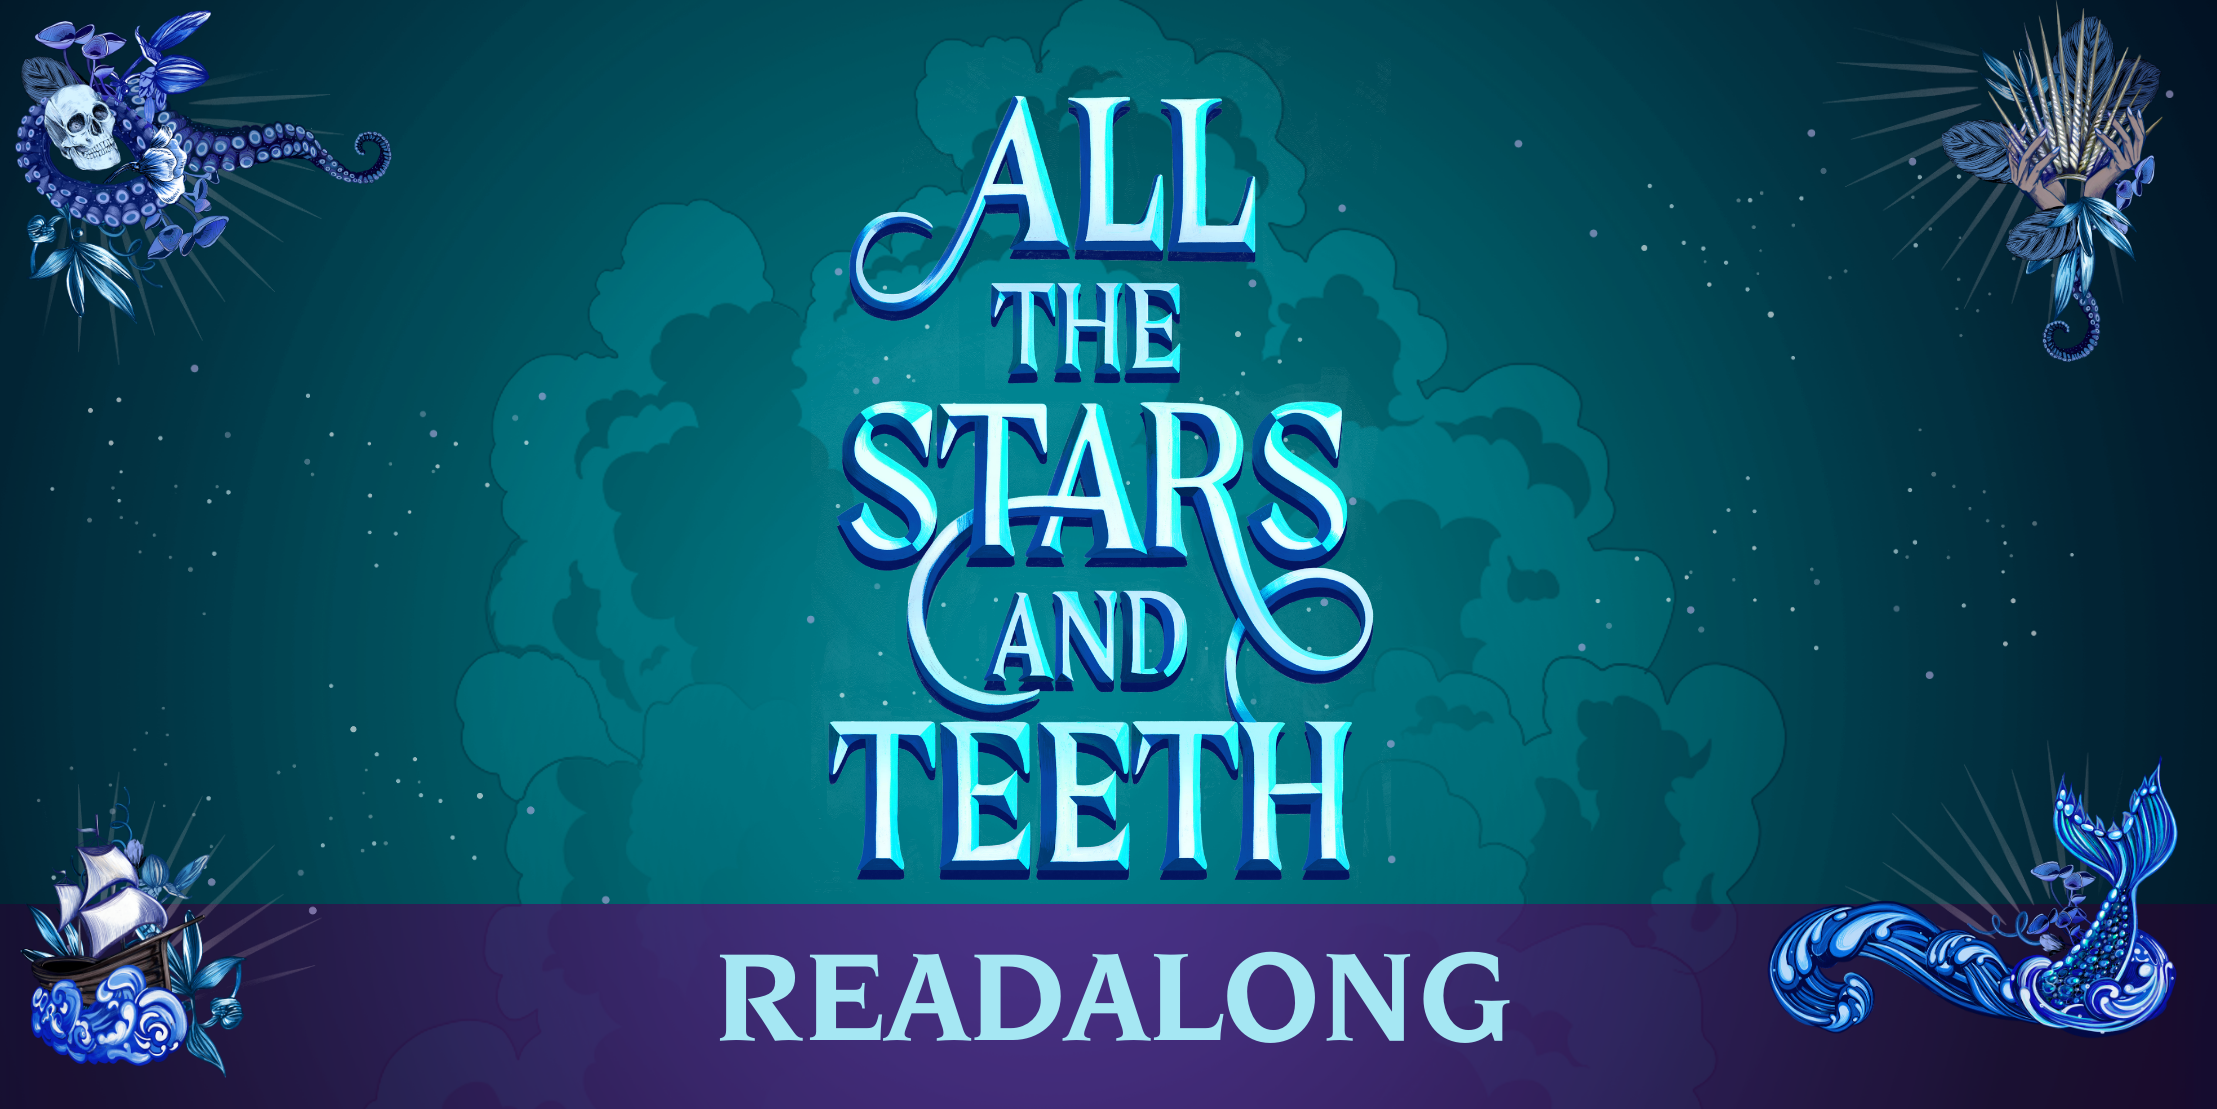 Set Sail on the Keel Reading Voyage: All the Stars and Teeth Readalong